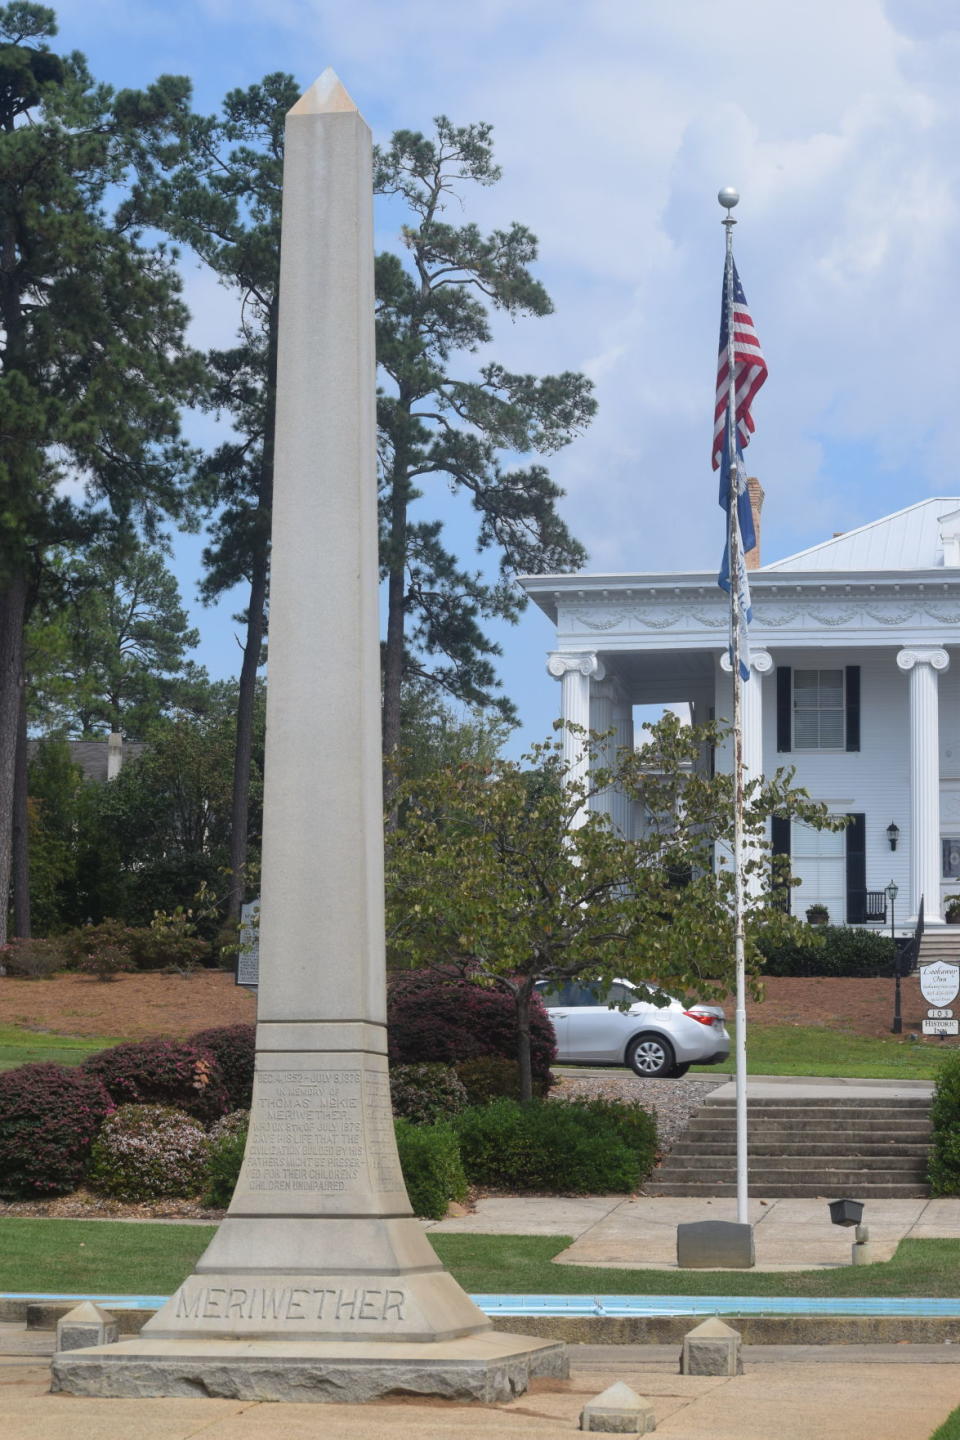 This undated photo shows the Meriwether monument in Calhoun Park in North Augusta, S.C. North Augusta Mayor Bob Petitt wants to add memorials to the eight black men who were killed by white supremacists in 1876 to the monument honoring the only white man killed in the gunfight. (Lindsey Hodges/The Aiken Standard via AP)